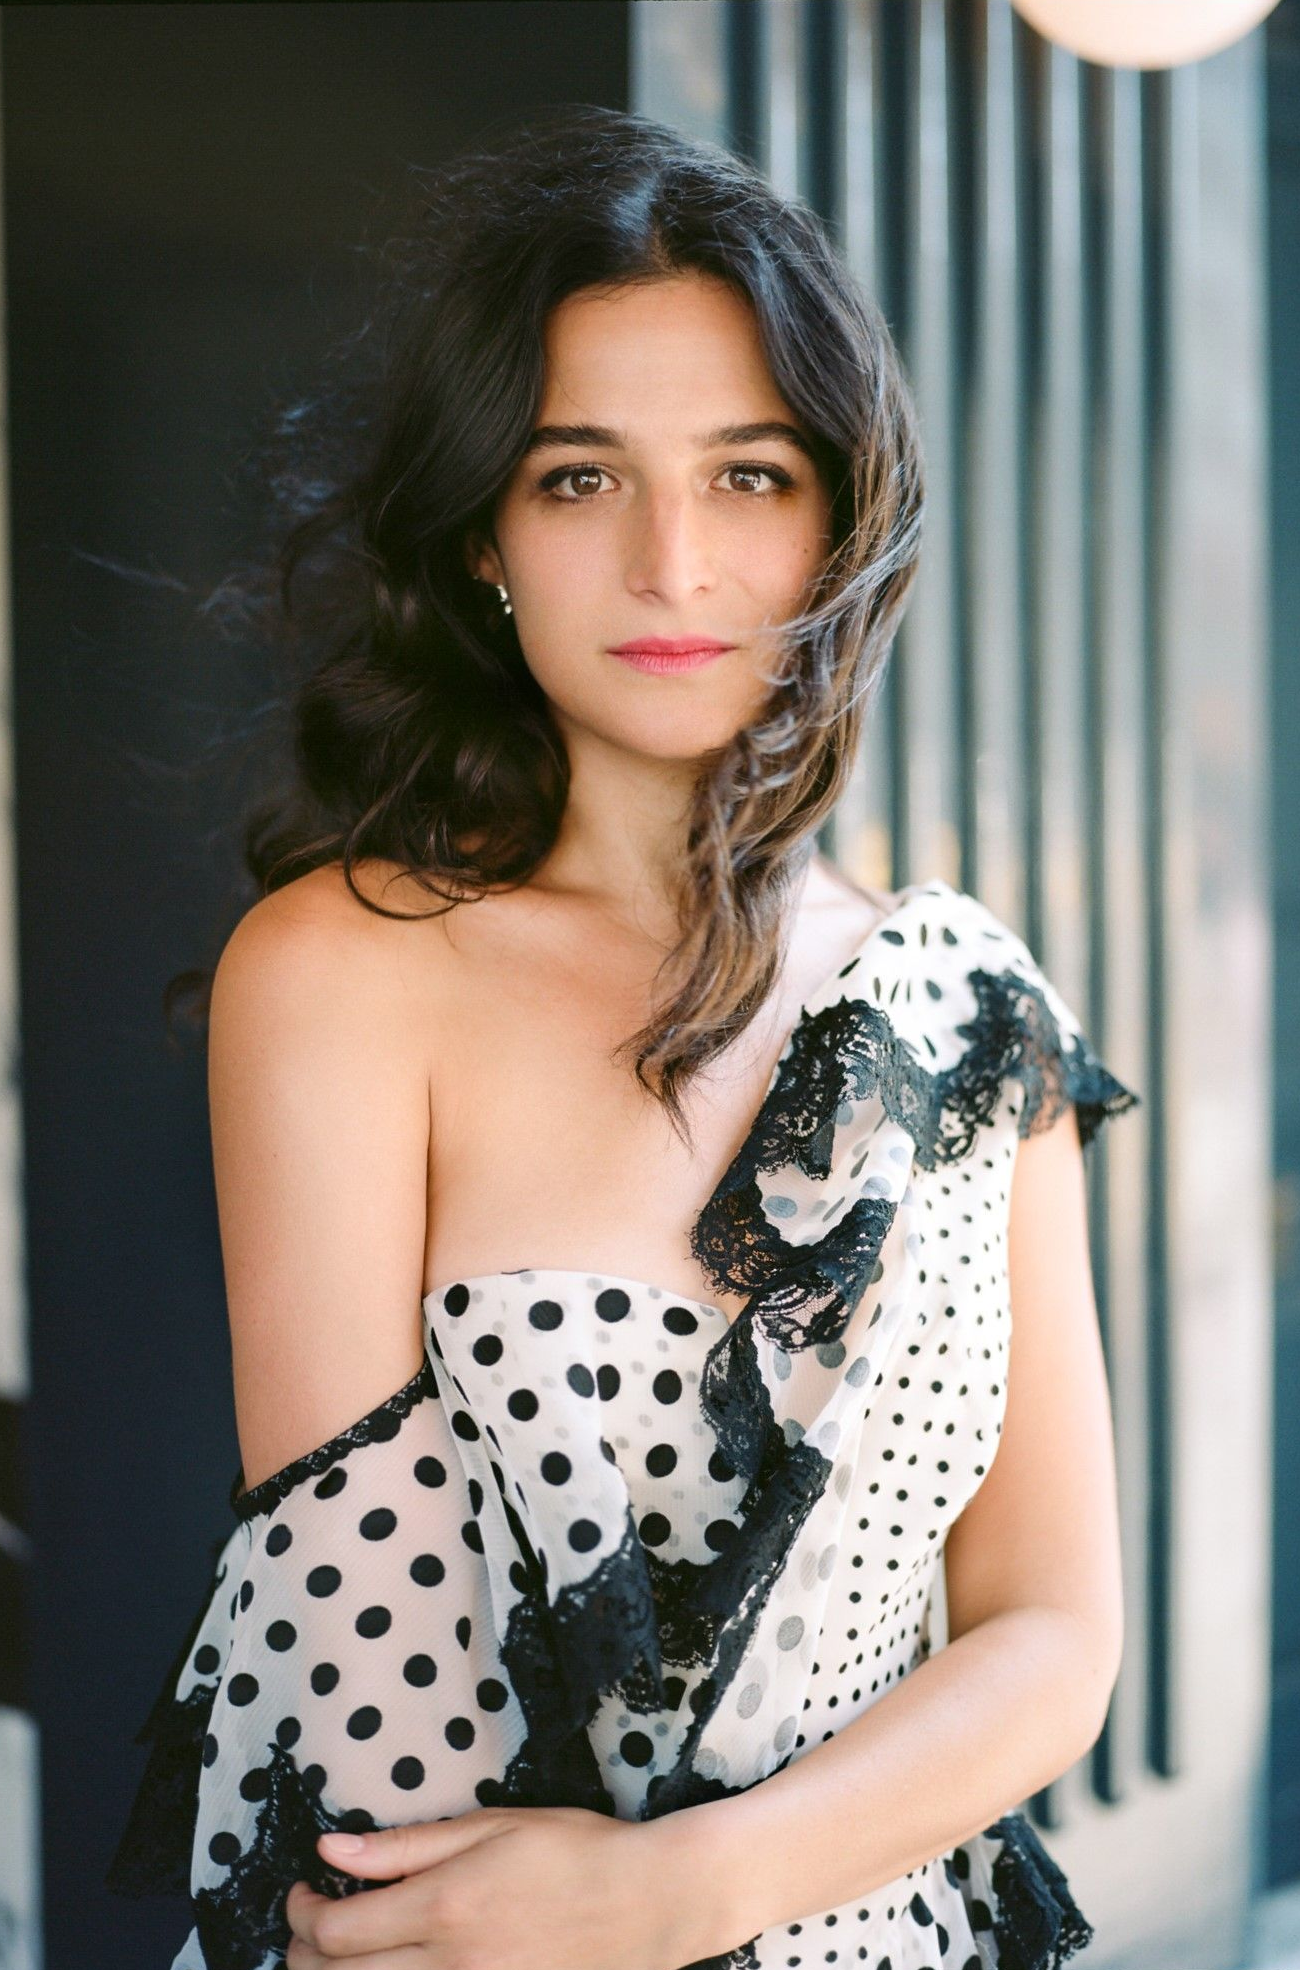 jenny slate movies and tv shows